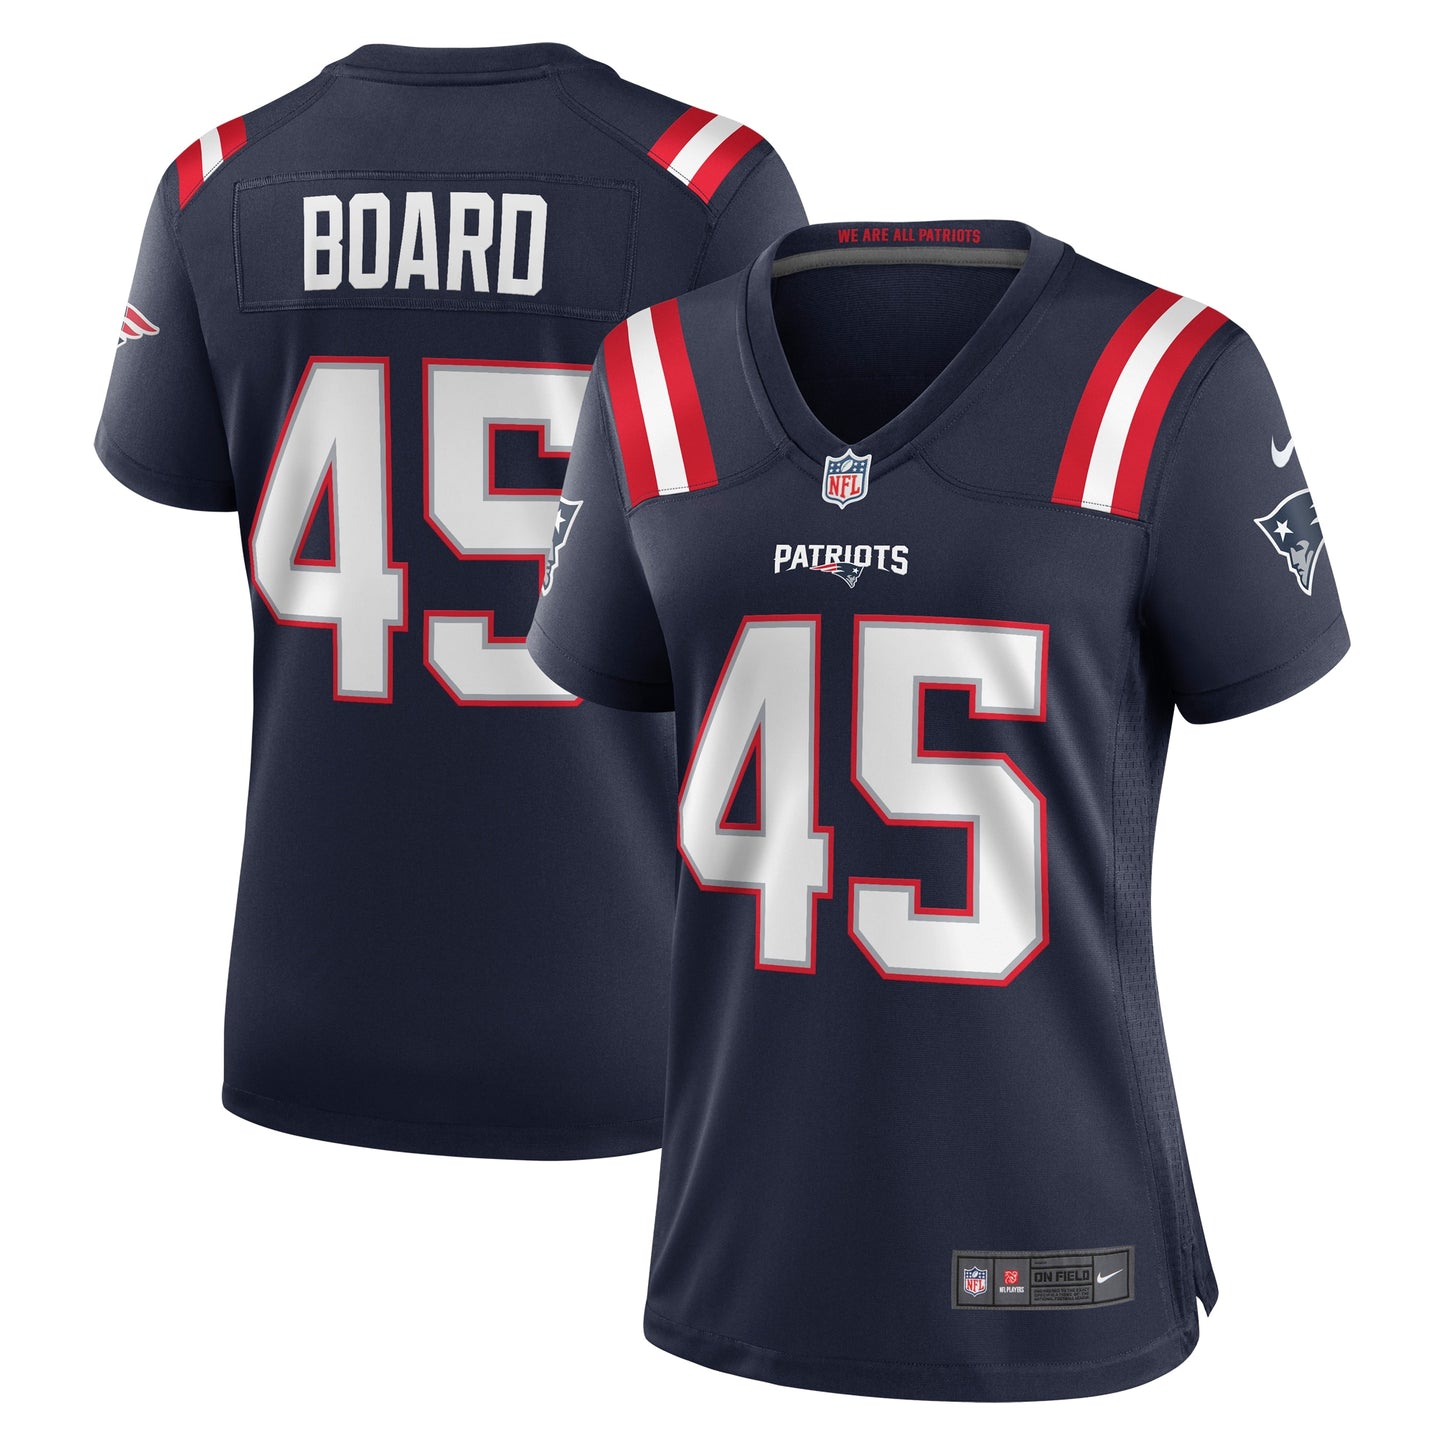 Chris Board New England Patriots Nike Women's Game Player Jersey - Navy